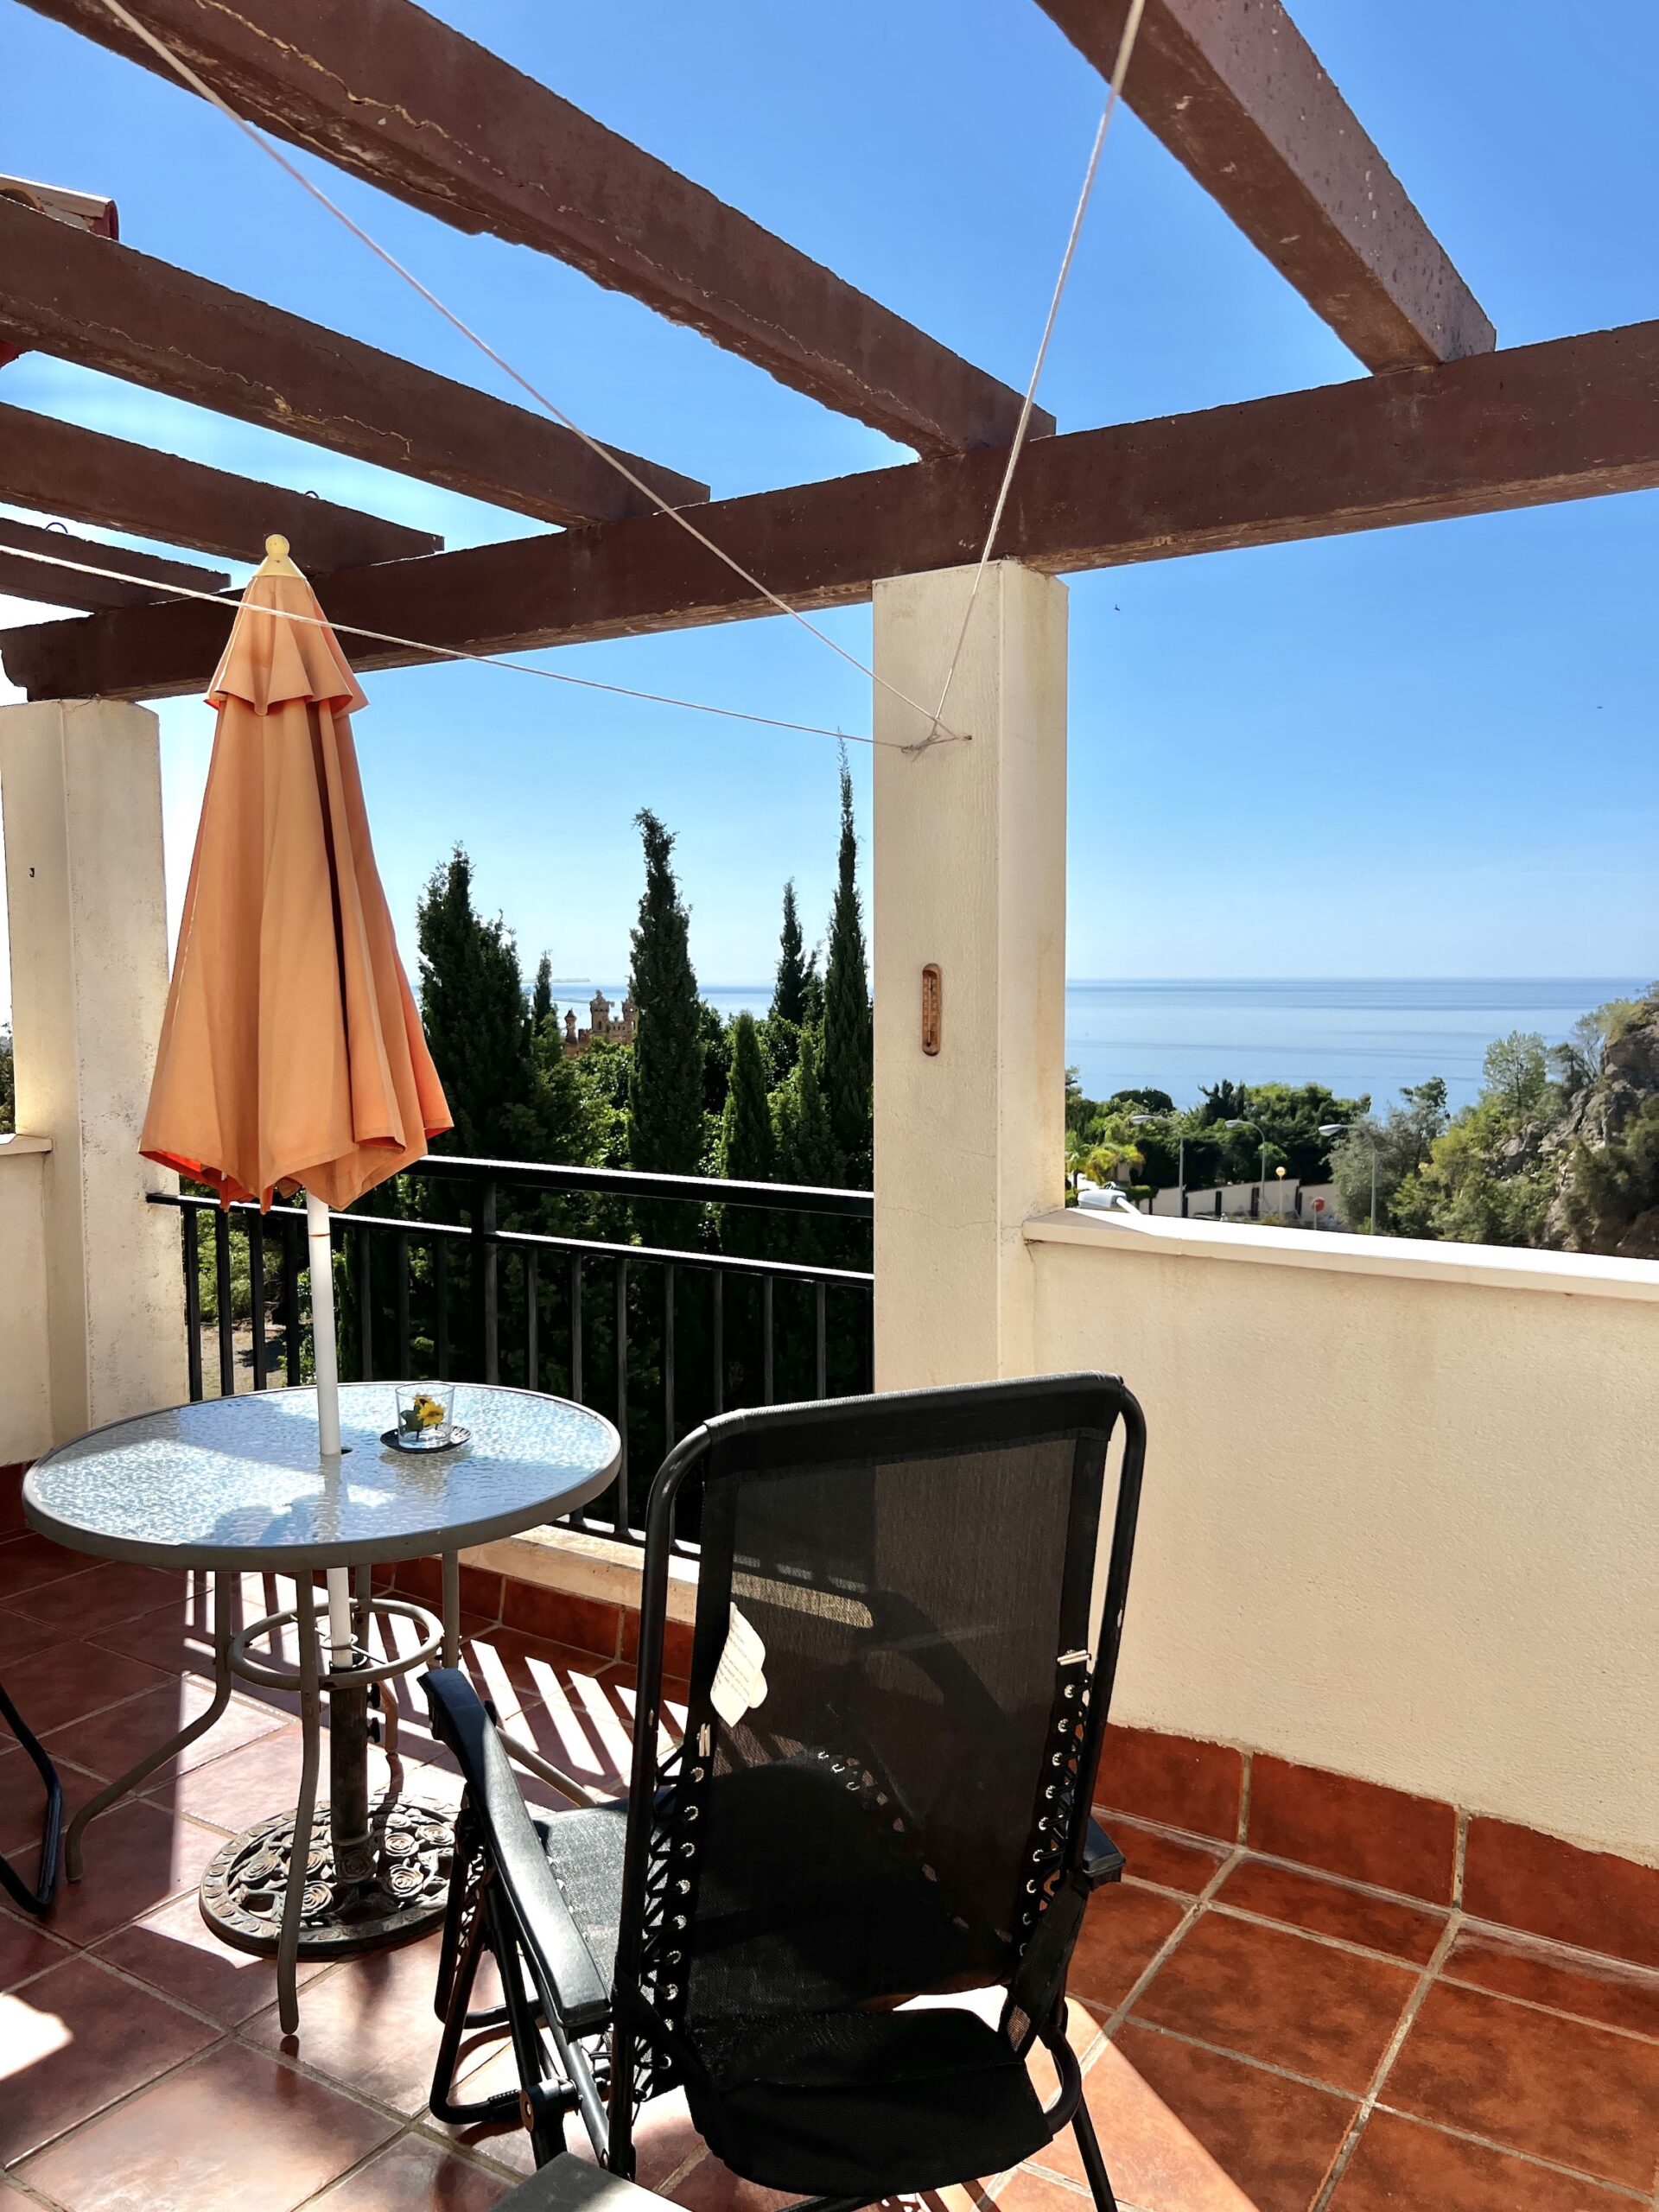 Incredible Sea Views from this Well Positioned Two-Bedroom, Two-Bath, Flat in Los Nadales, Benalmádena Pueblo.